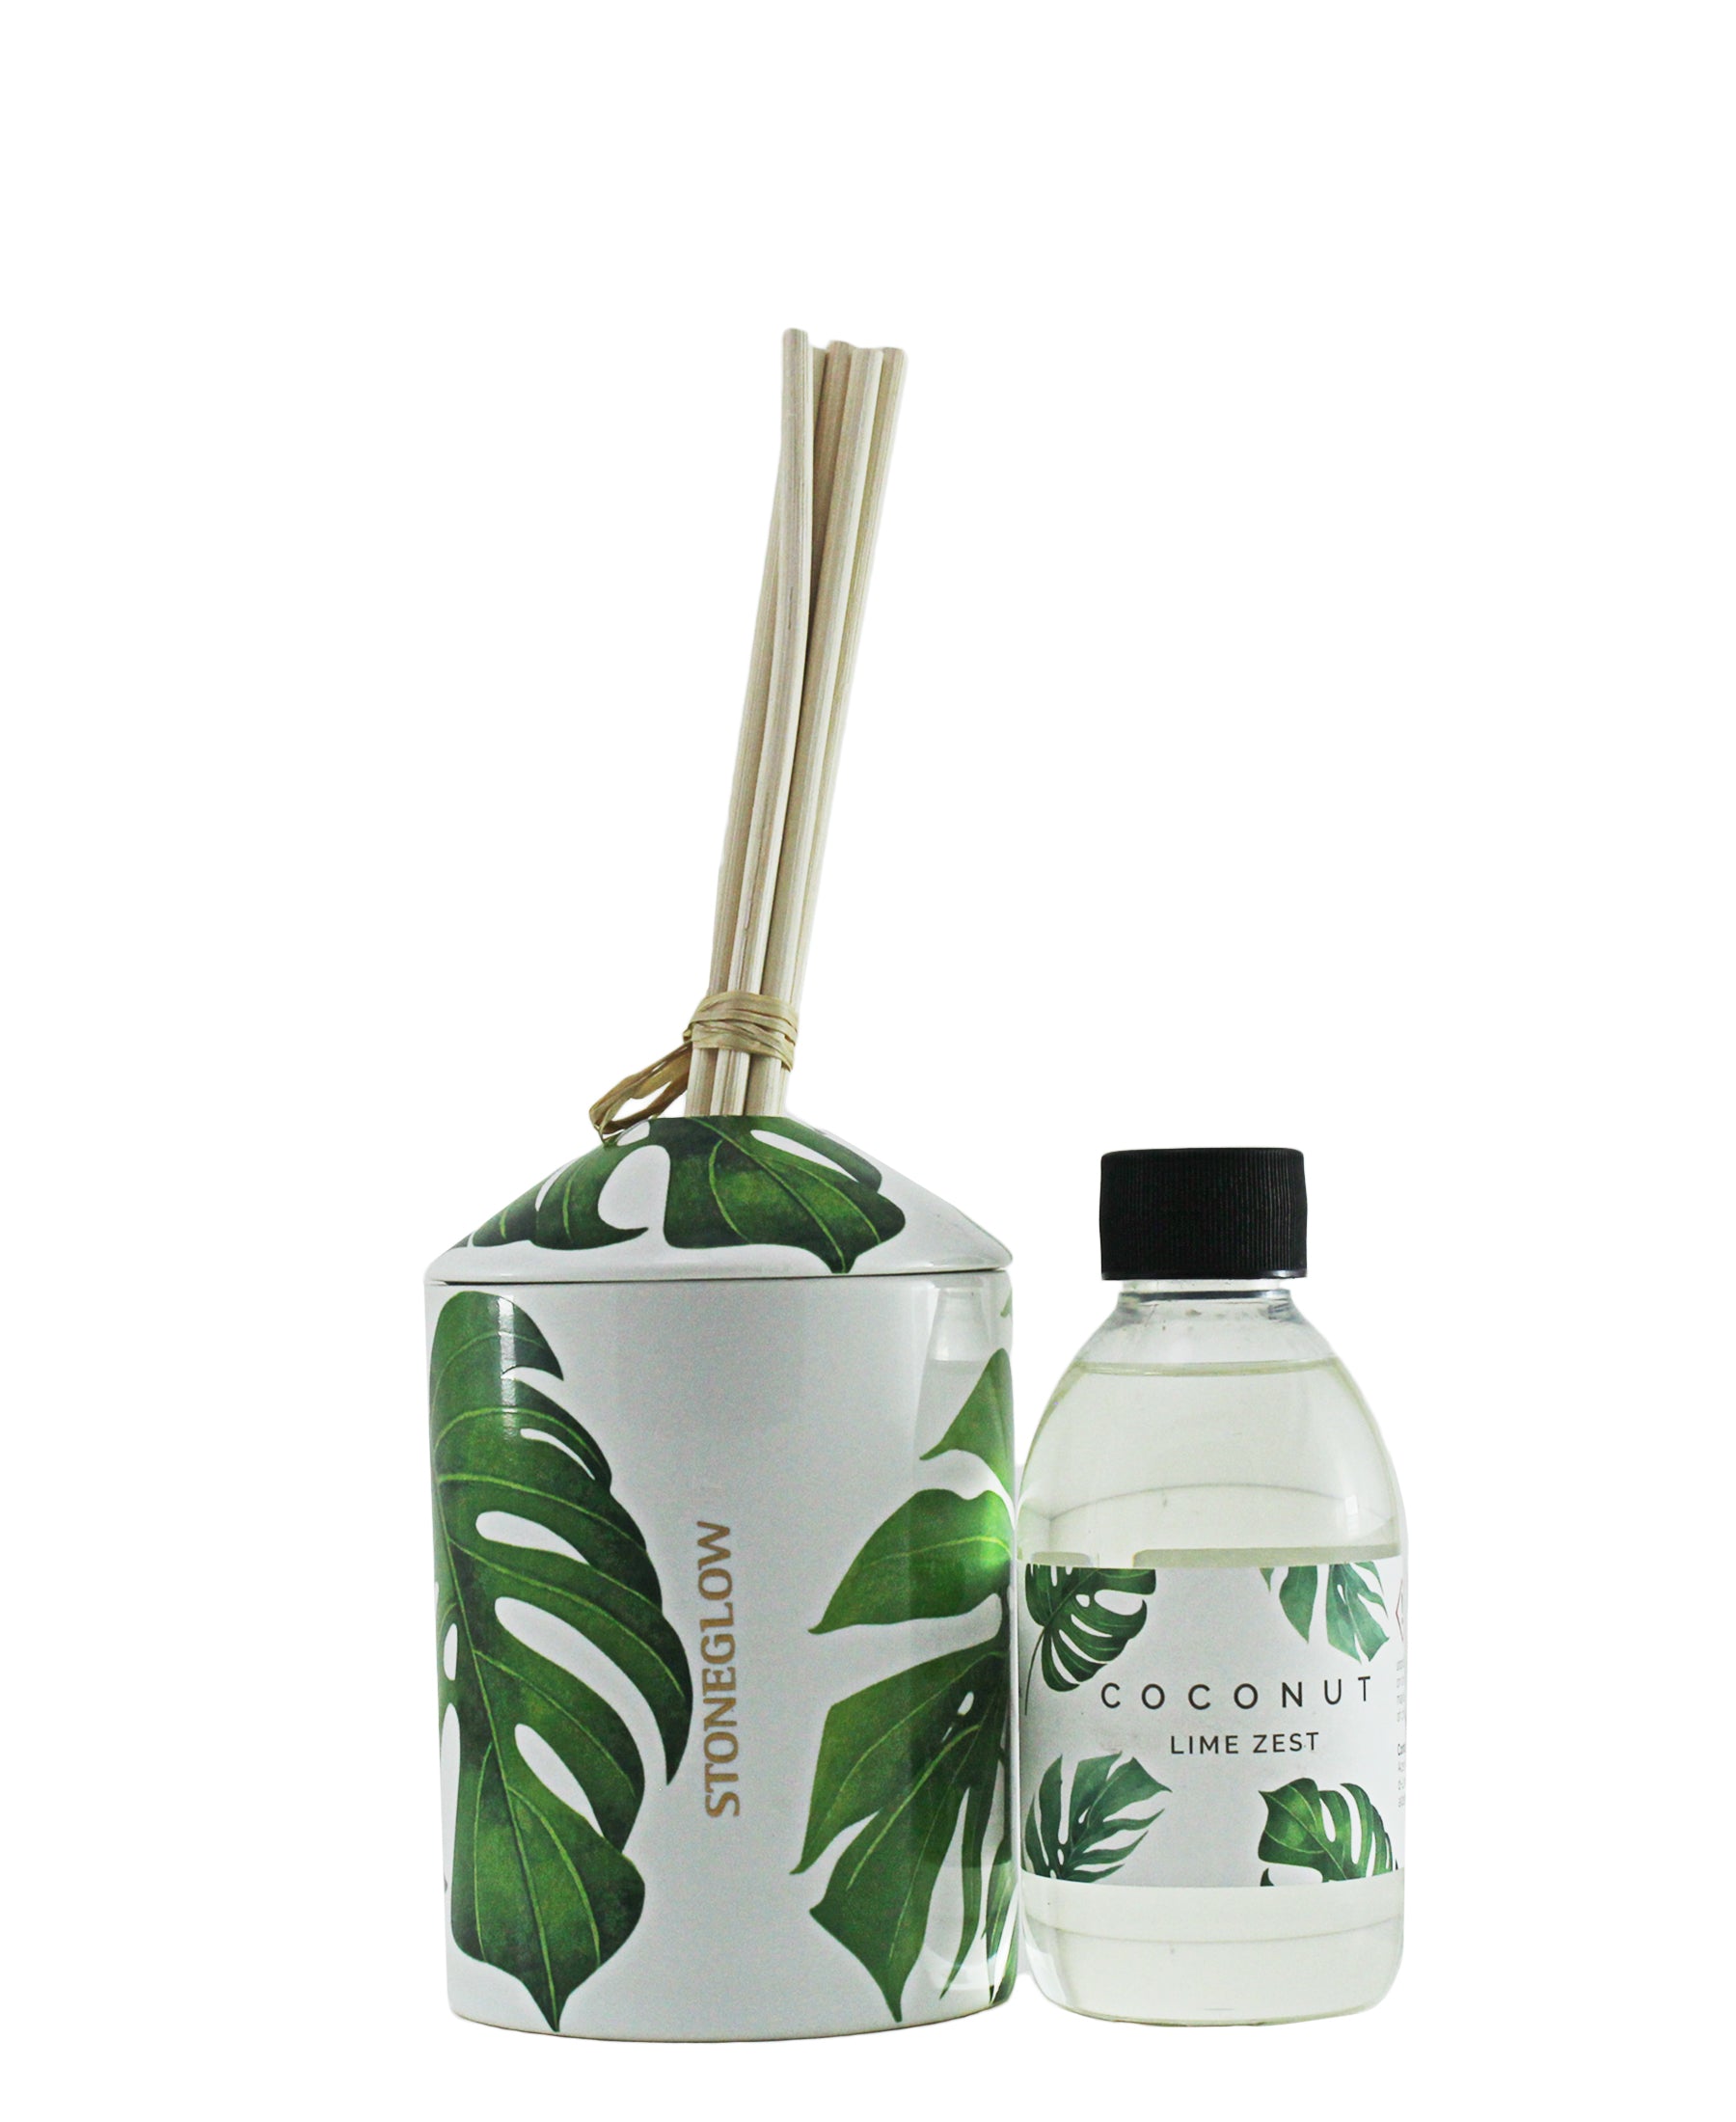 Stoneglow Hibiscus Coconut & Lime Zest Diffuser - Green